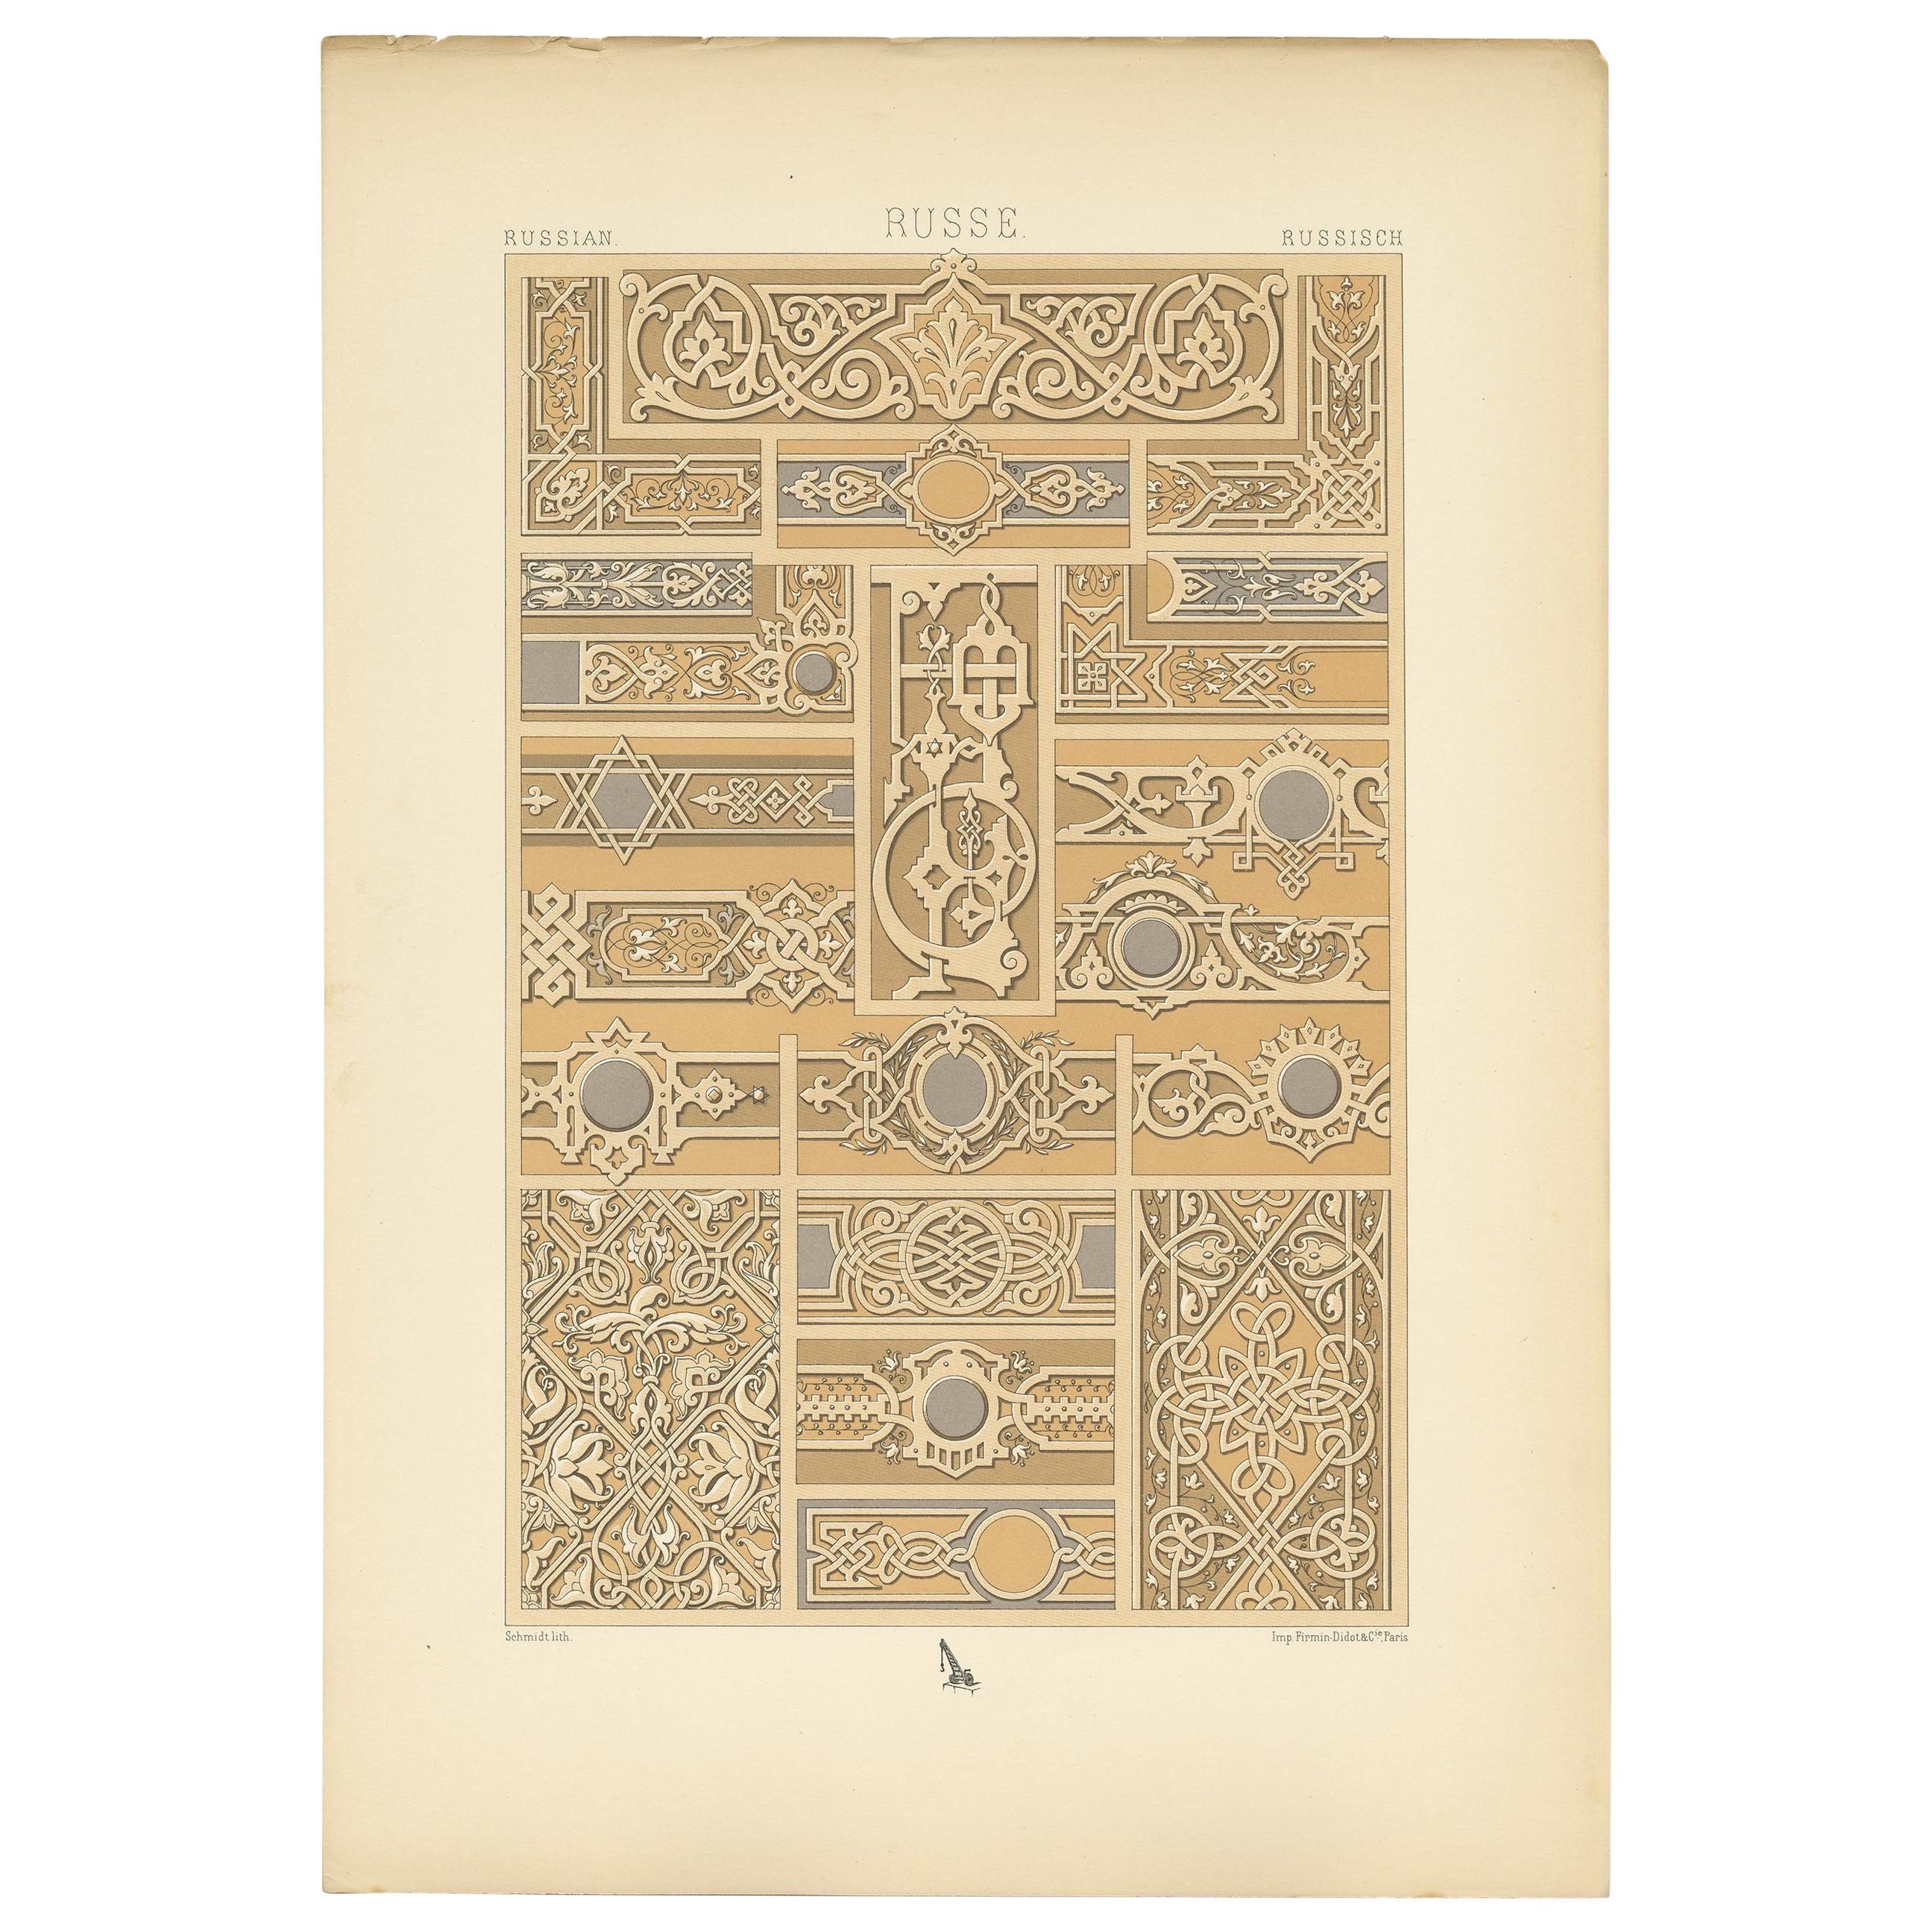 Pl. 69 Antique Print of Russian Motifs from Metalwork Ornaments by Racinet For Sale